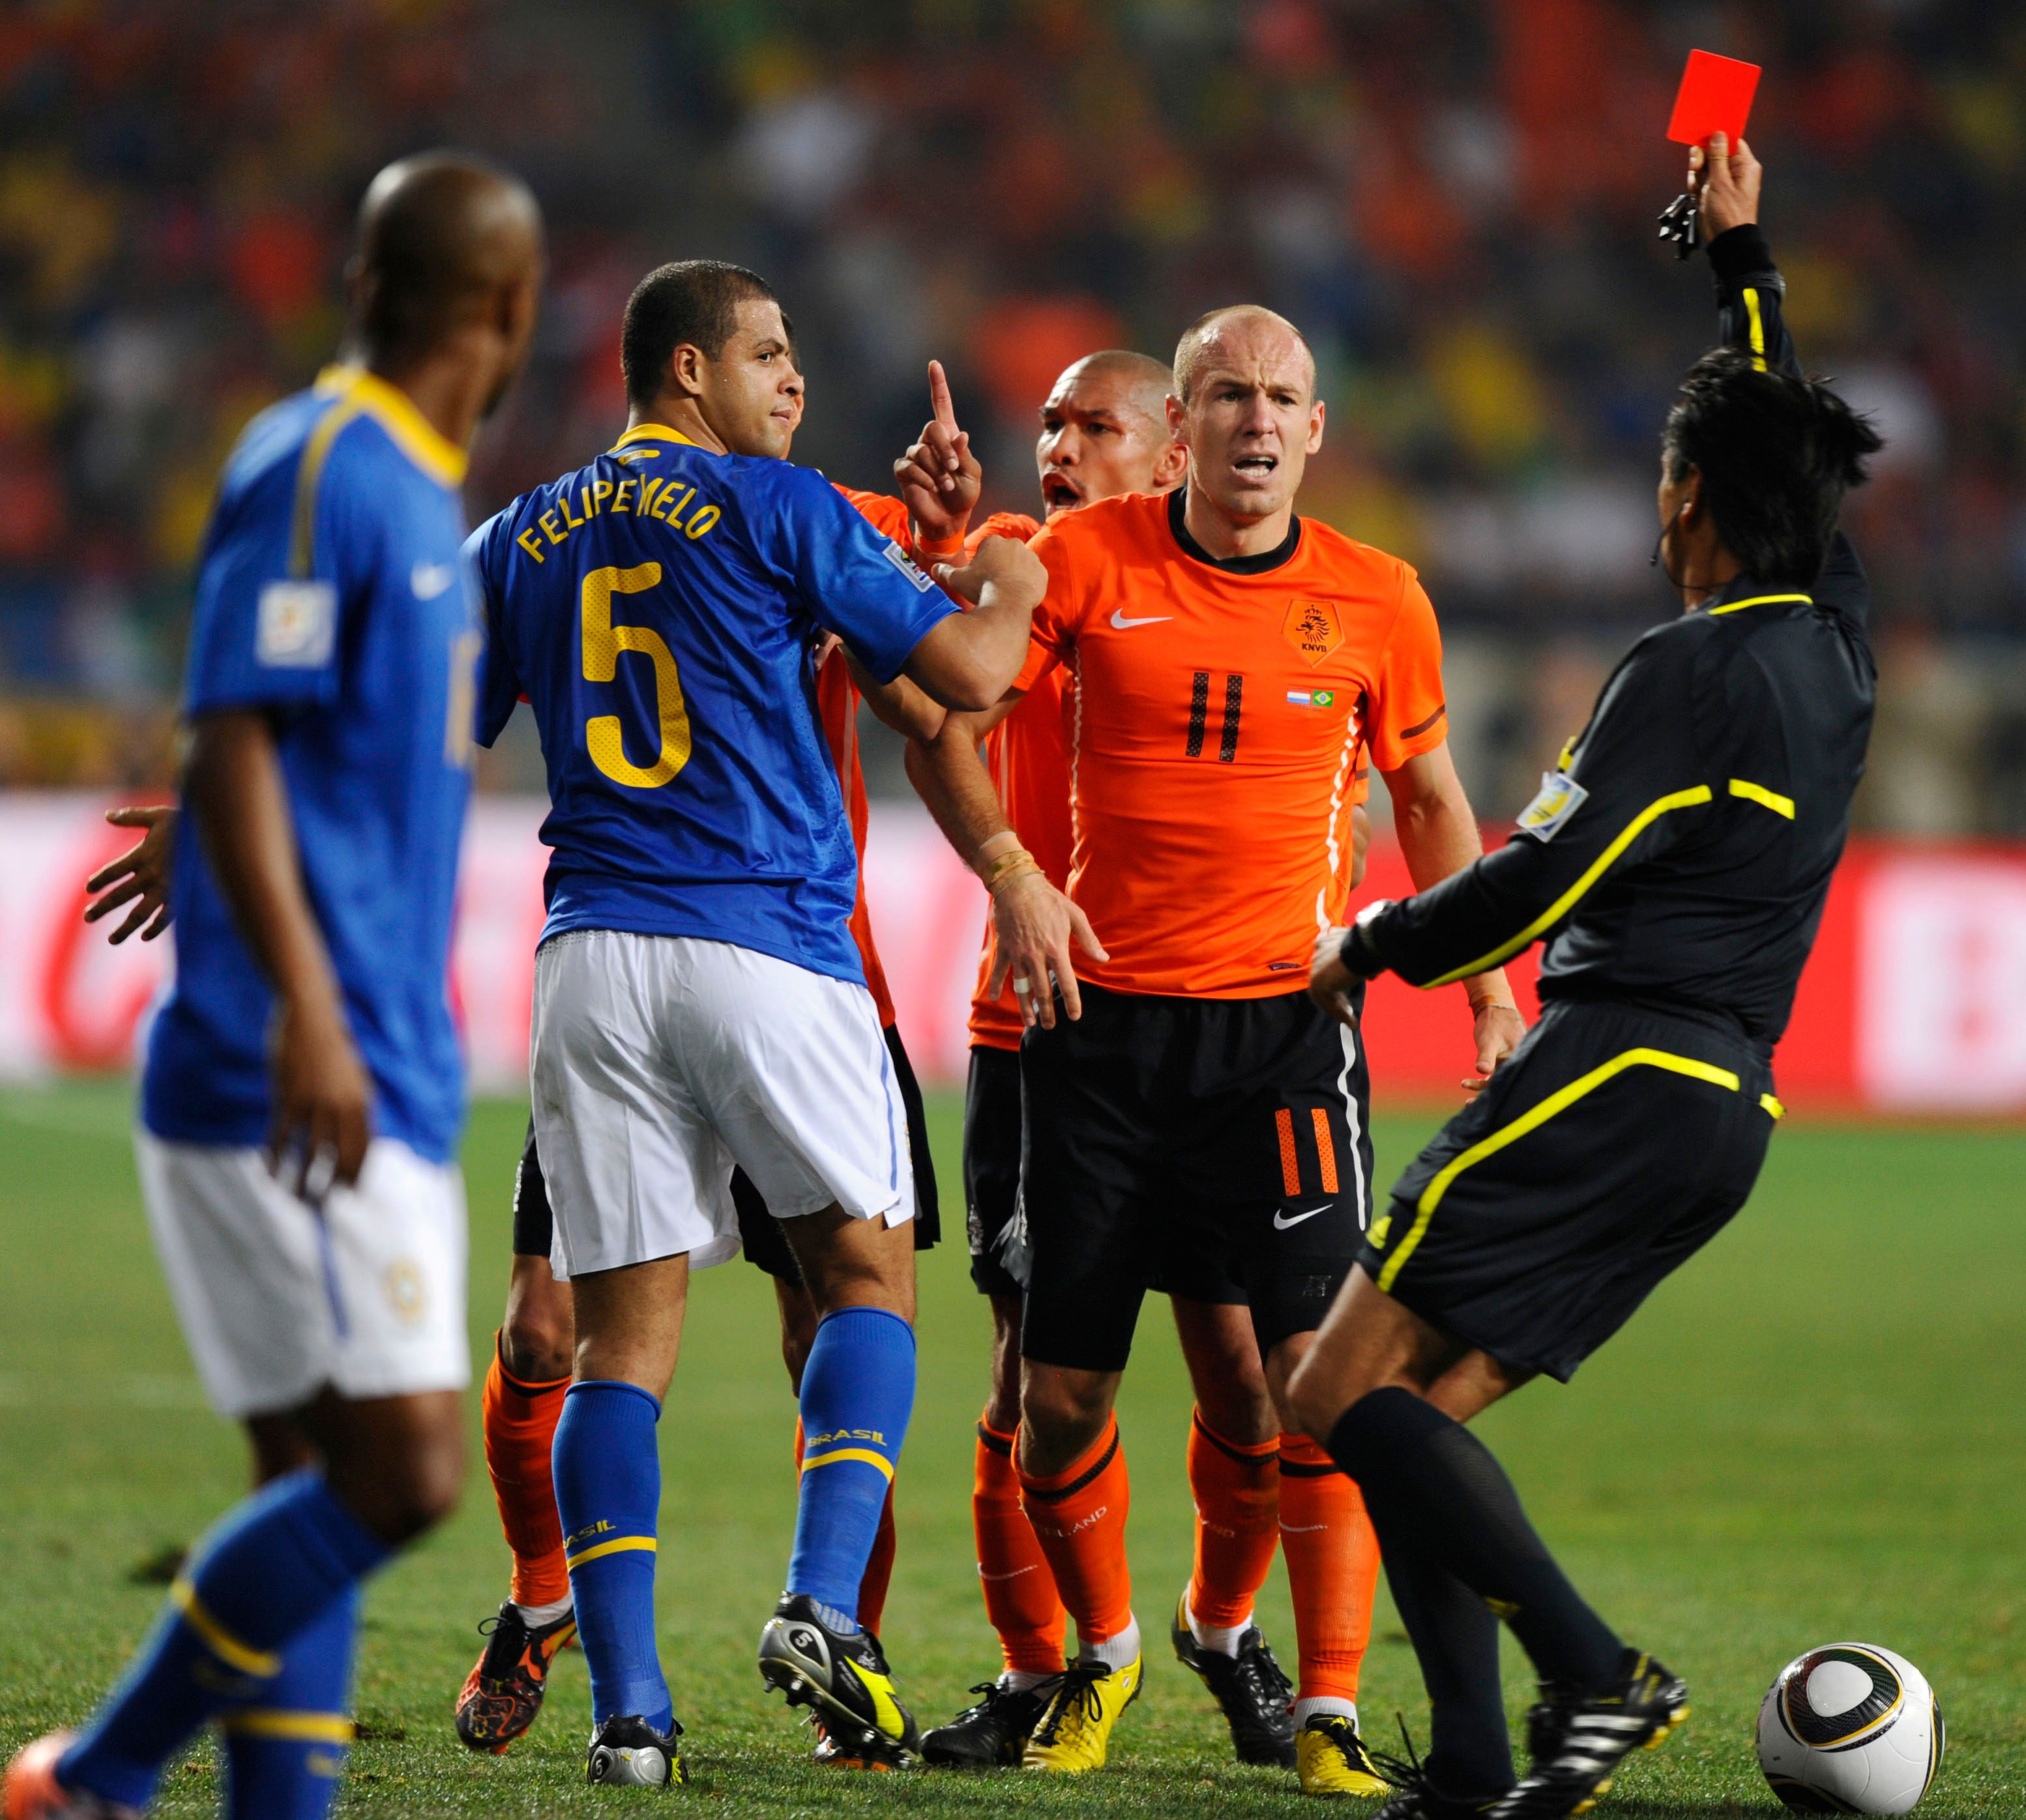 Melo is sent off for his foul on Robben.